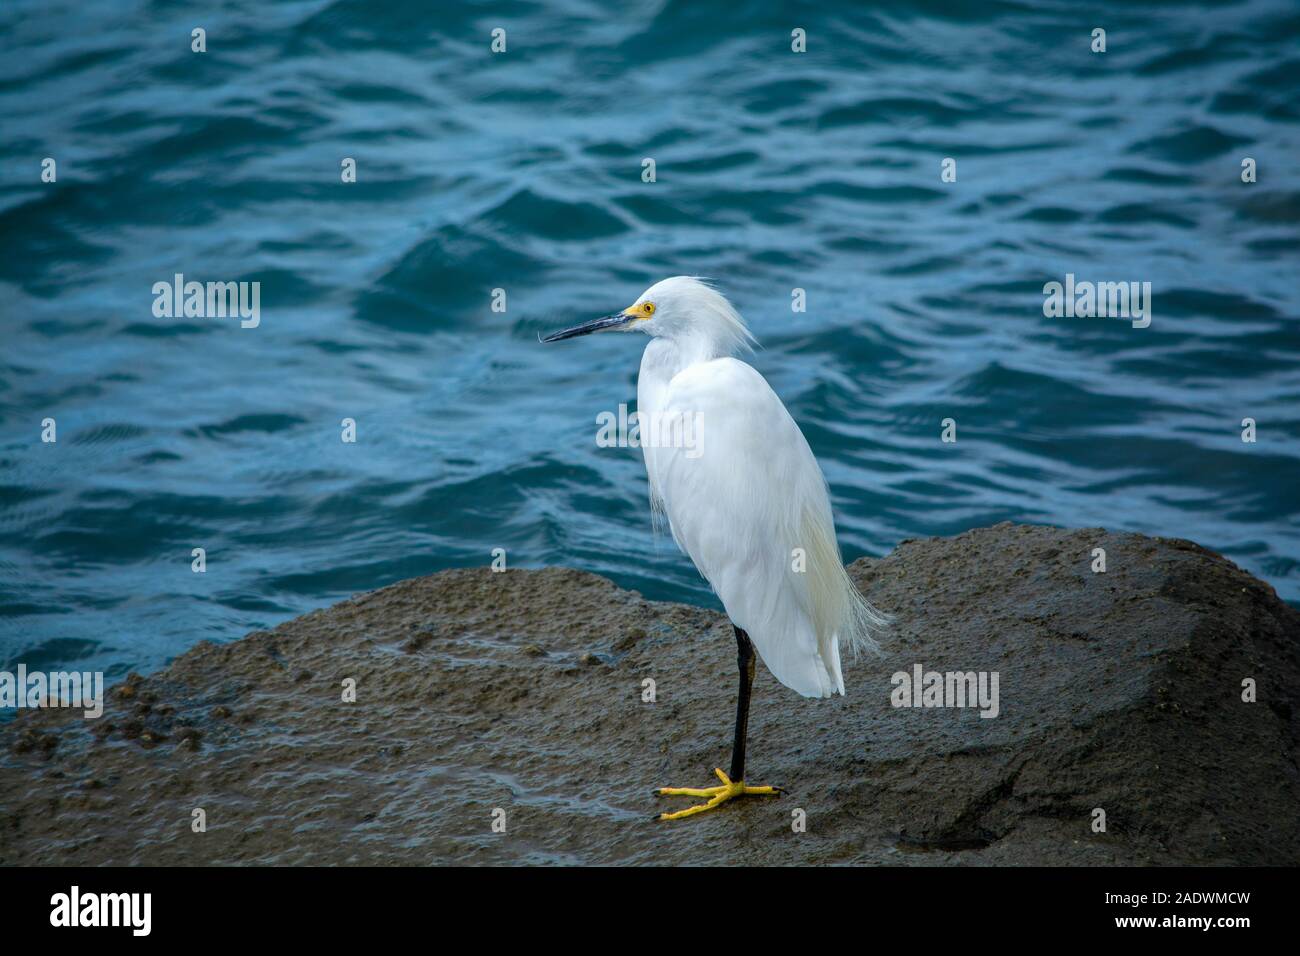 Snowy egret by the sea. Portrait of a heron with yellow feet and yellow eyes. Sea view, Florida. Stock Photo